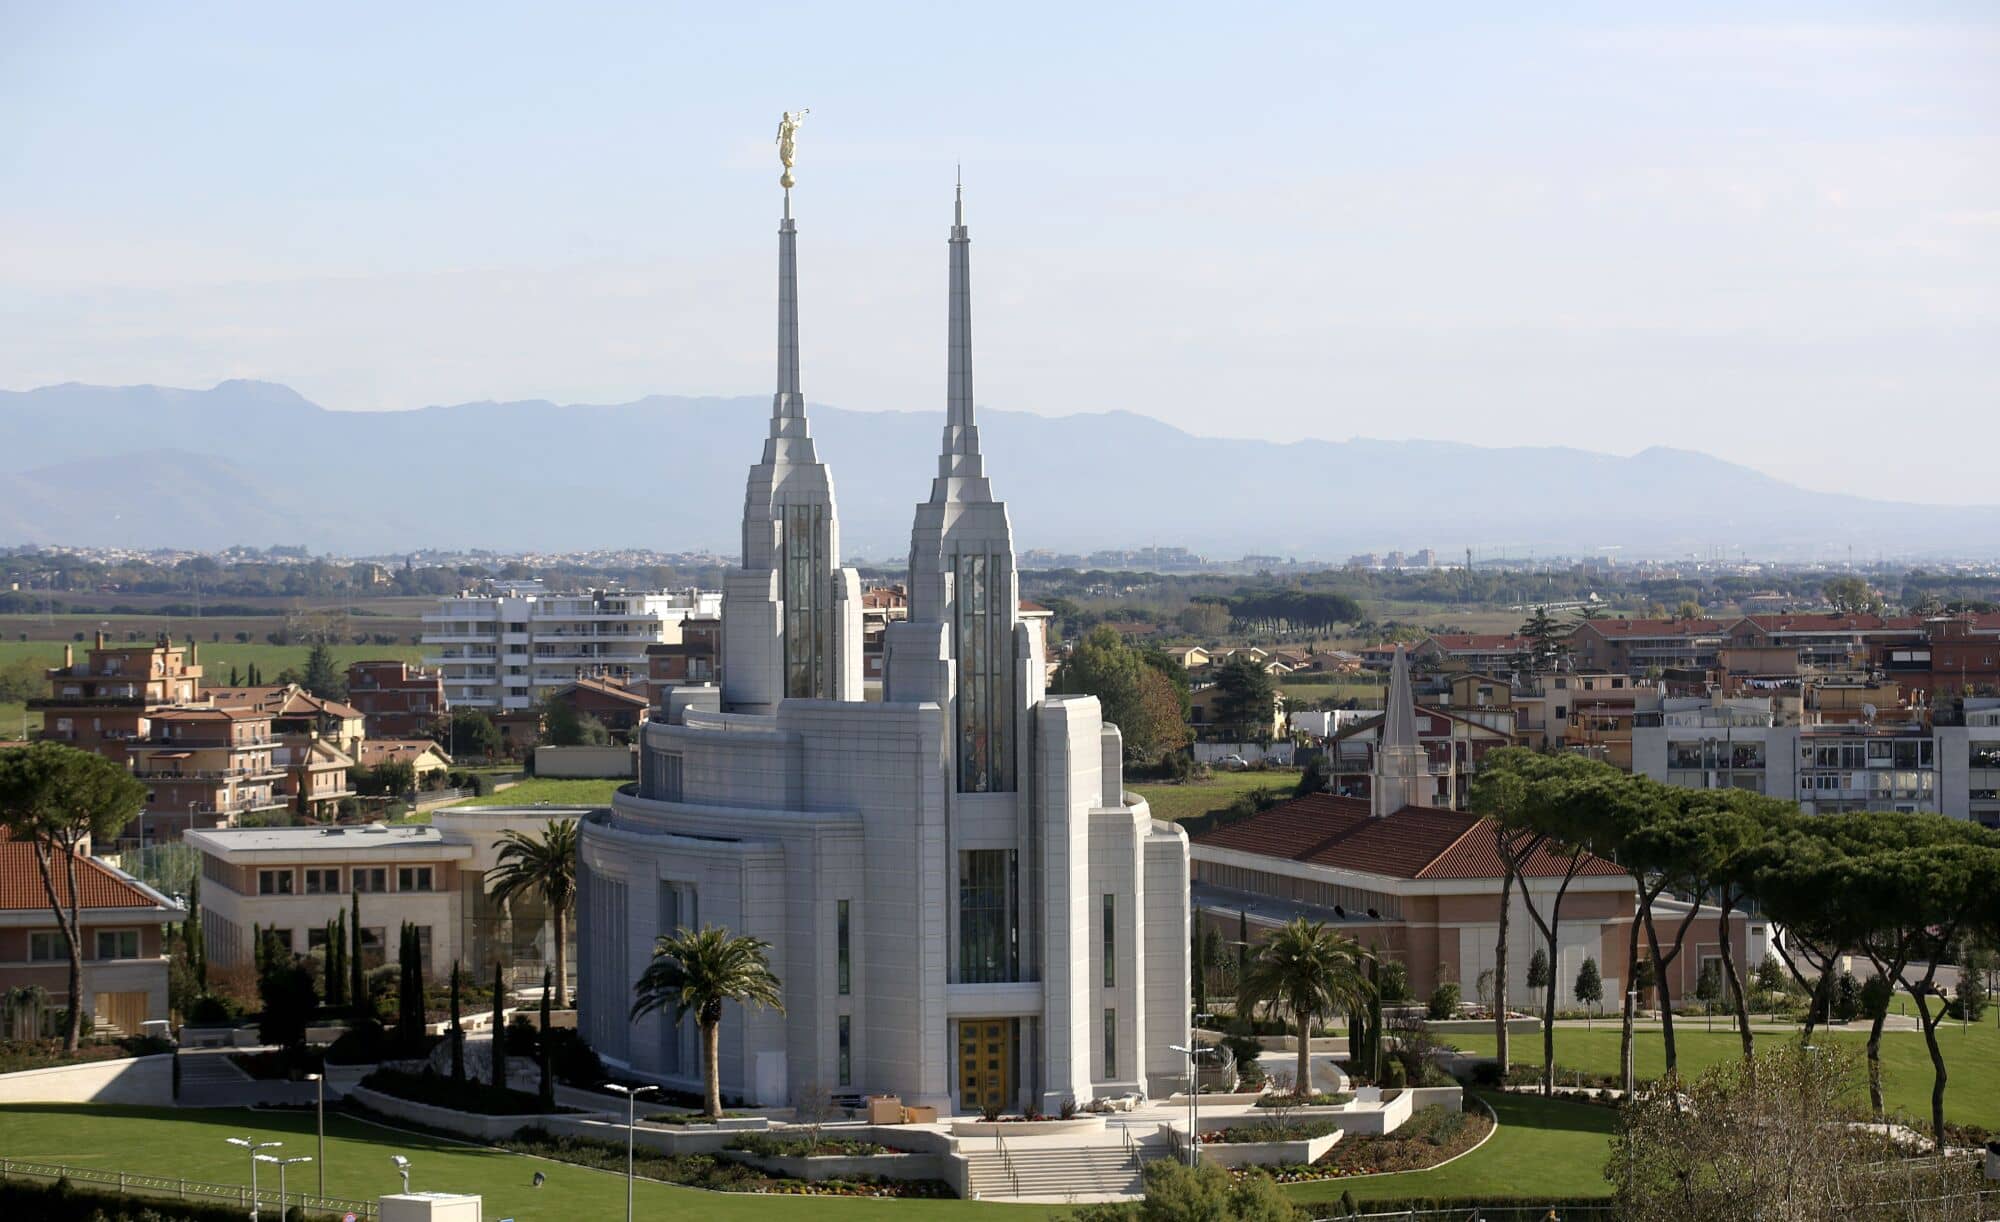 The exterior of the Rome Italy Temple, an oval building with a spire on each of the two ends.